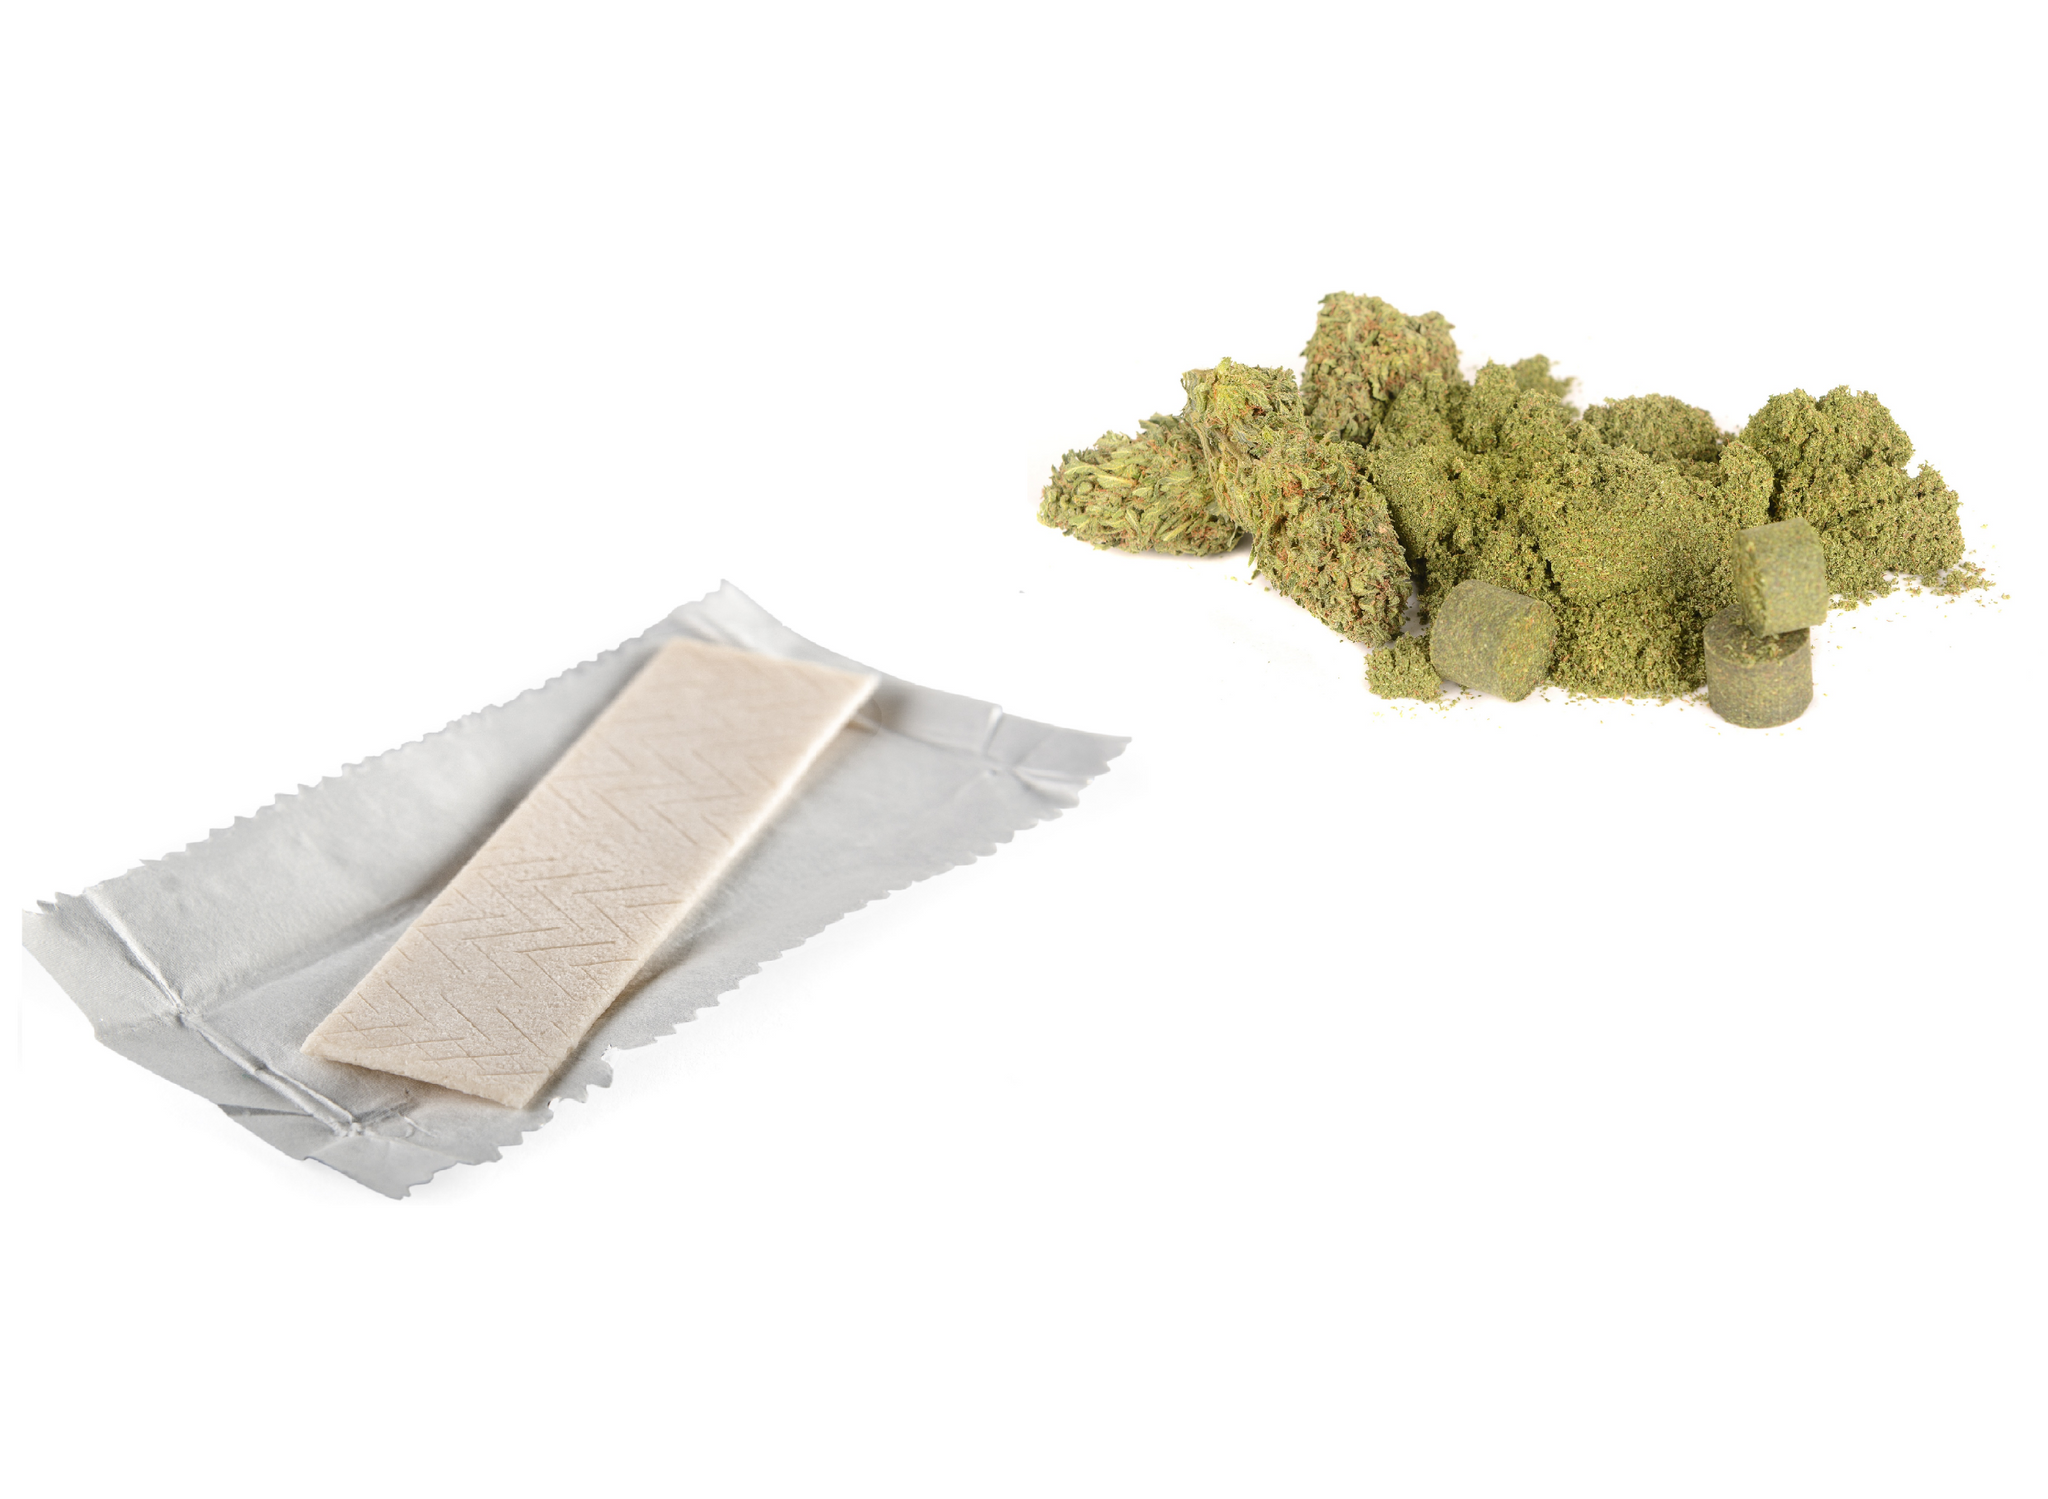 Elements Green 1/4 Rolling Papers & Supplies